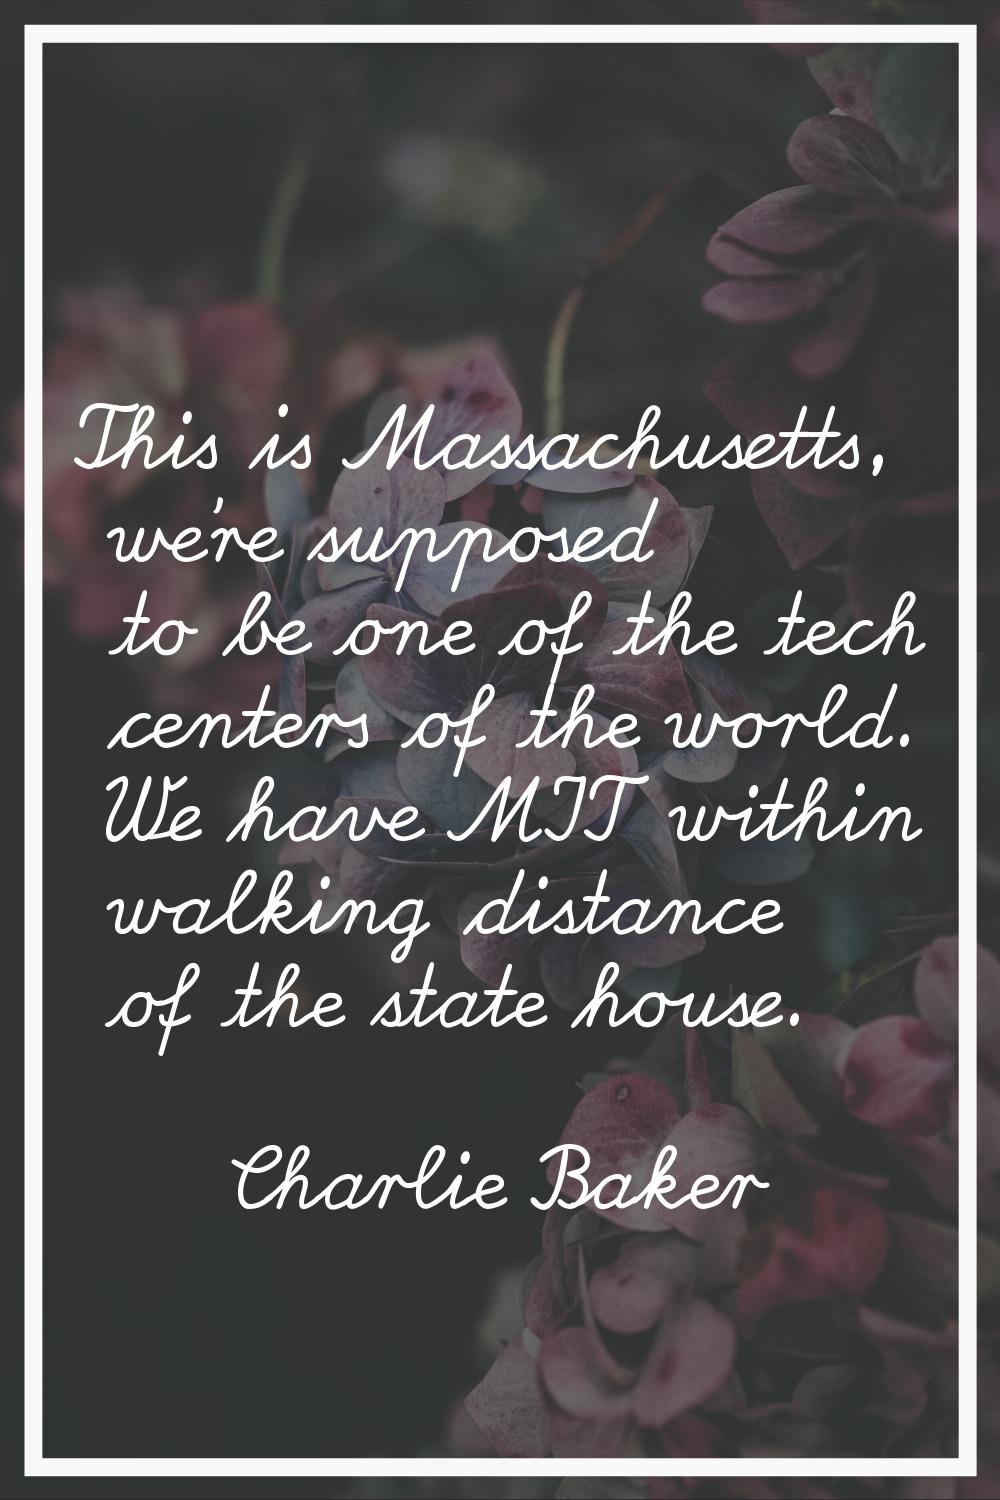 This is Massachusetts, we're supposed to be one of the tech centers of the world. We have MIT withi